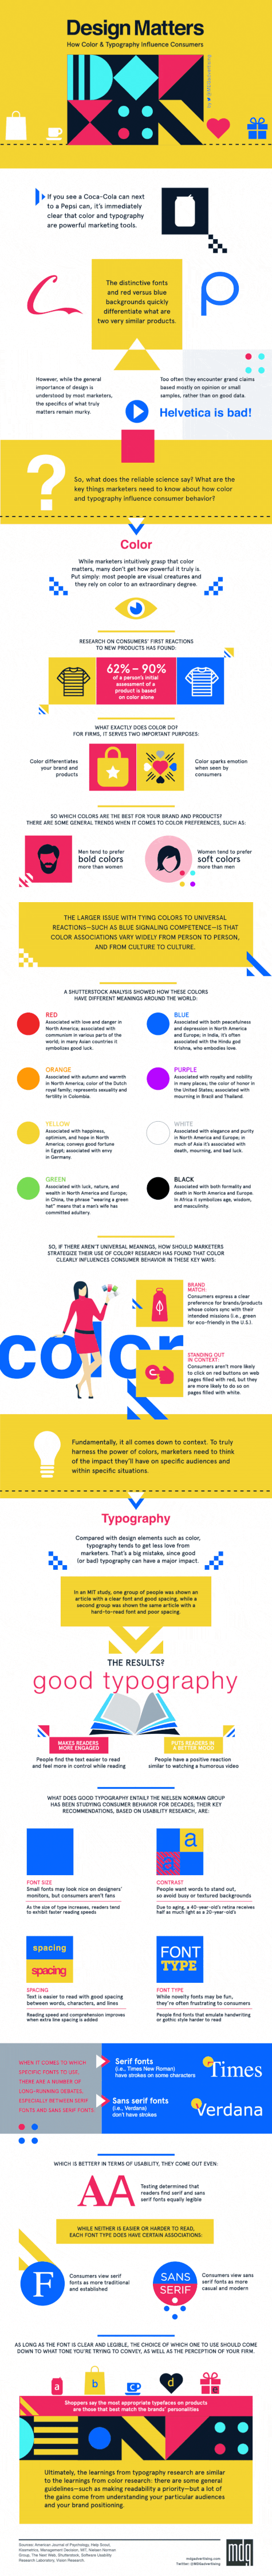 Design Matters: What Marketers Need to Know About Color and Typography [Infographic]